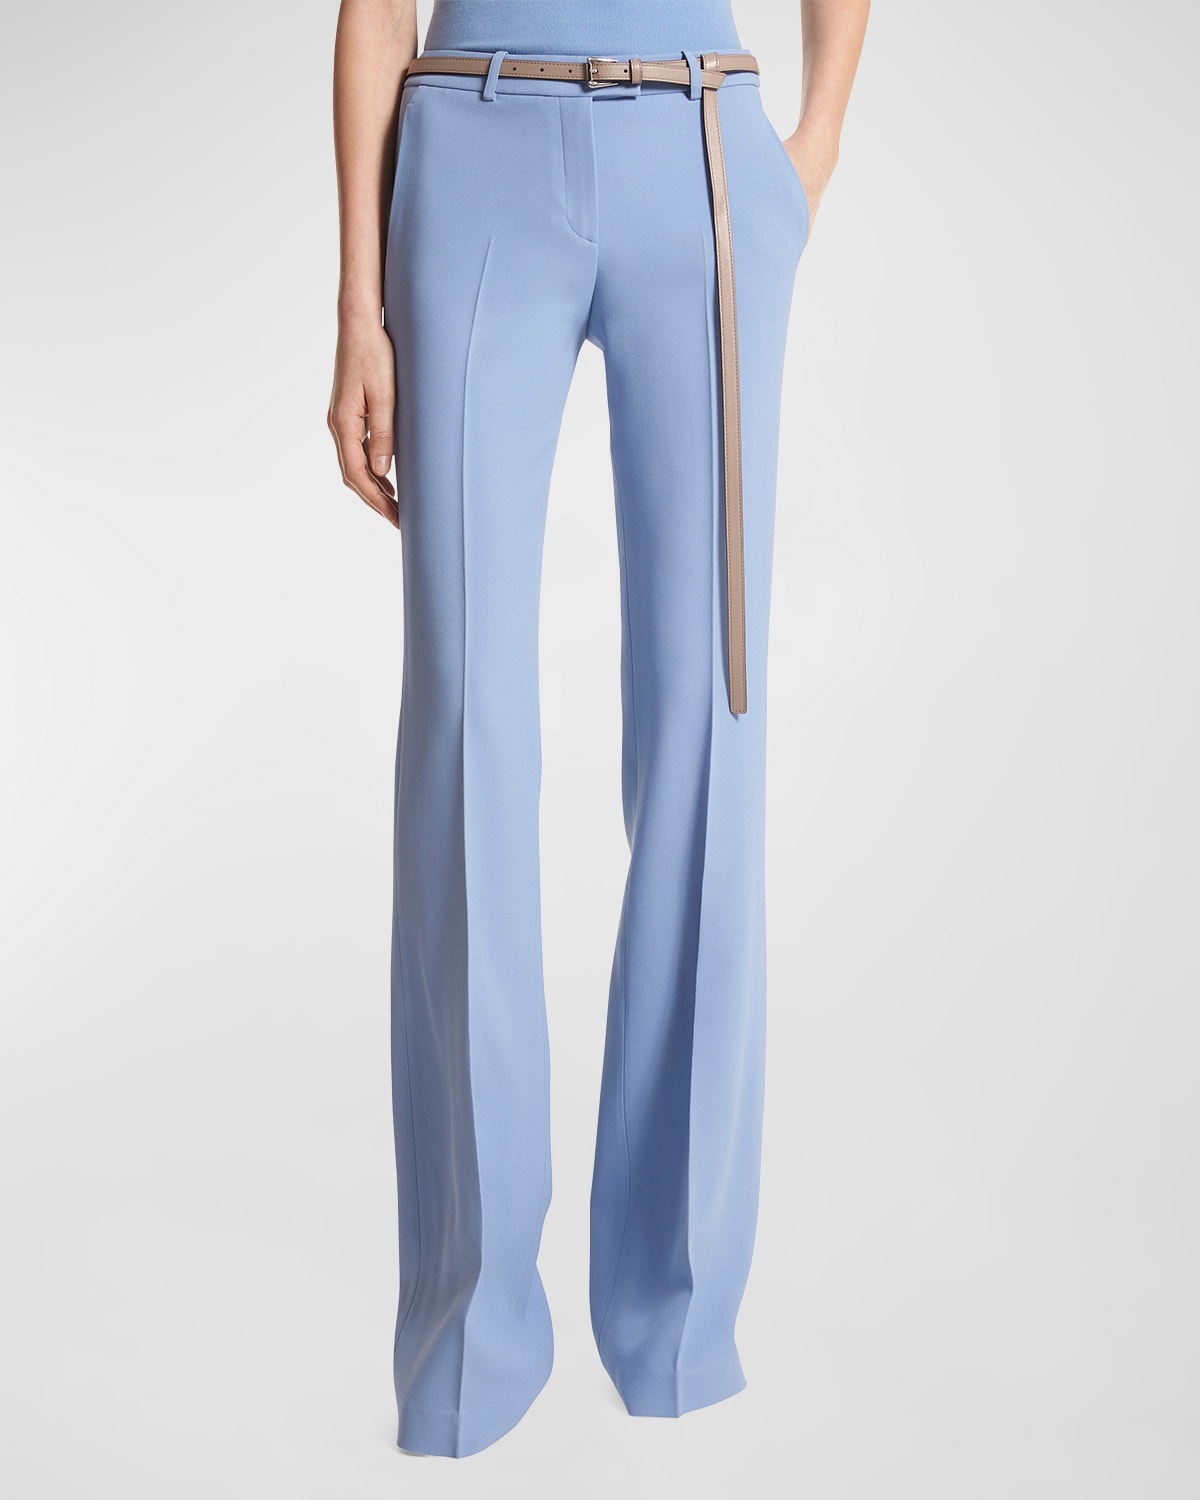 MICHAEL KORS HAYLEE DOUBLE-CREPE FLARE TROUSERS